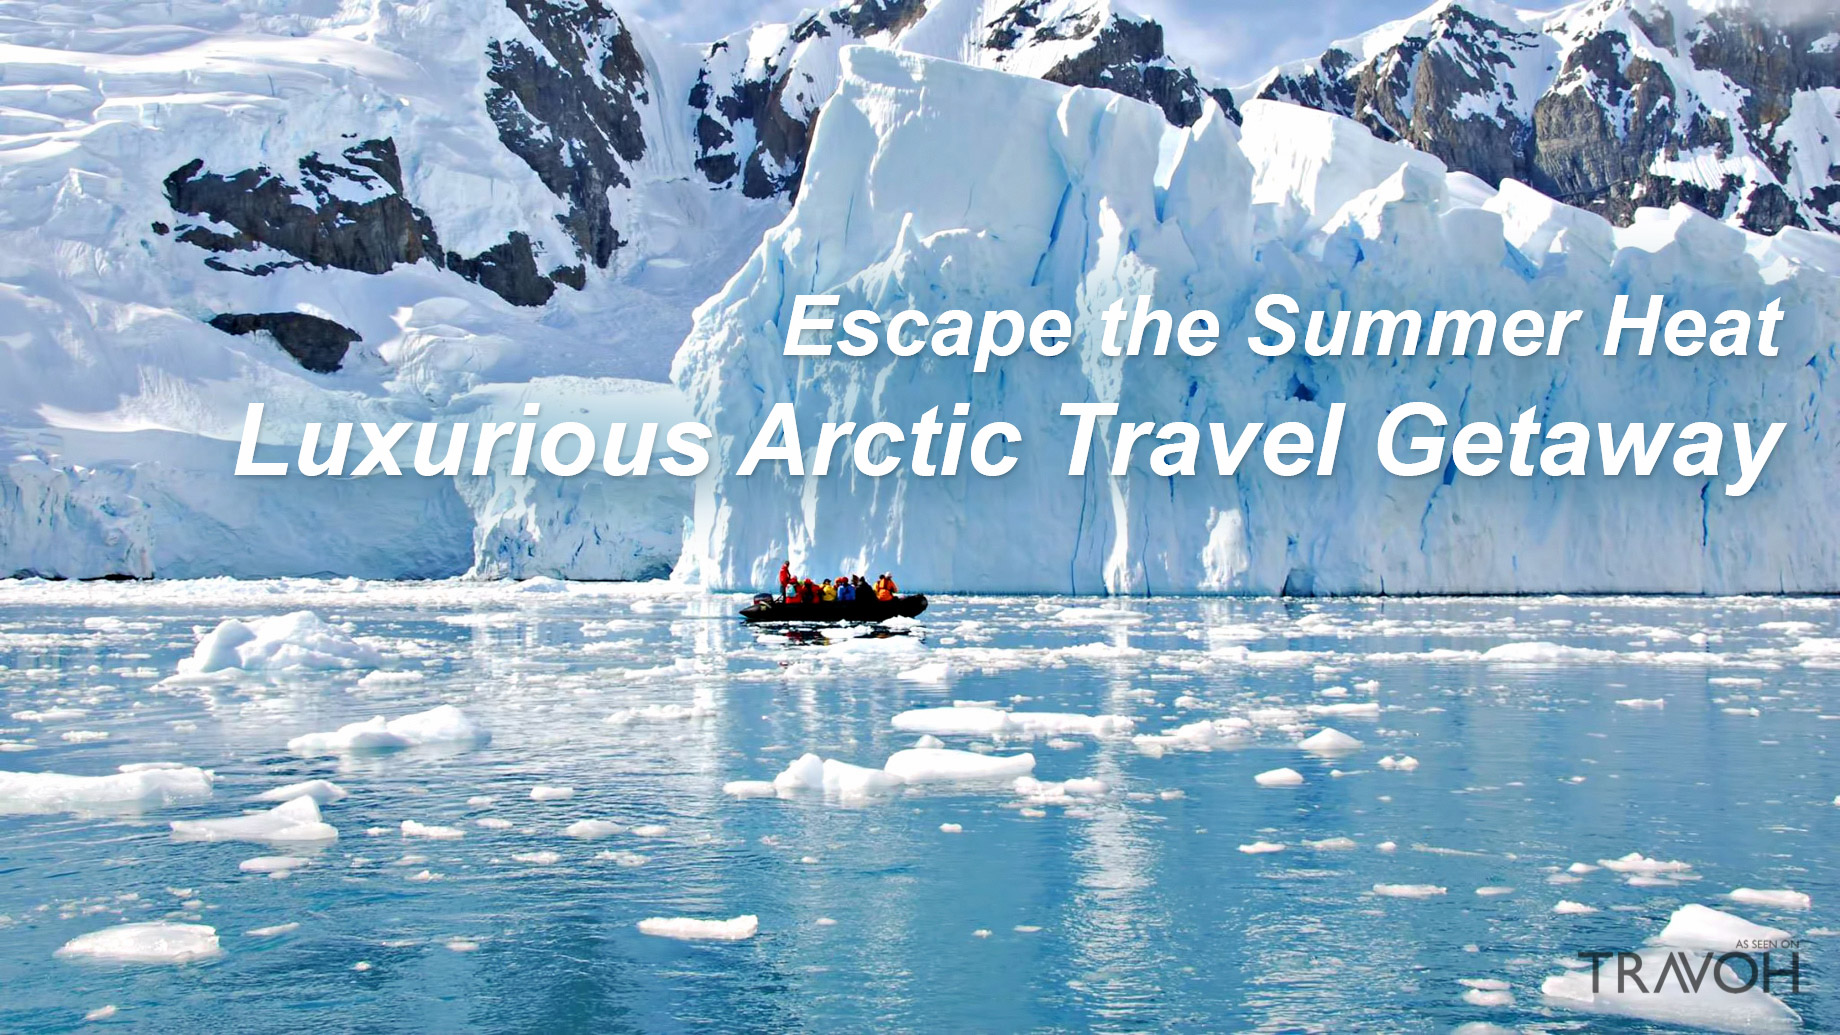 Escape the Summer Heat with a Luxurious Arctic Travel Getaway